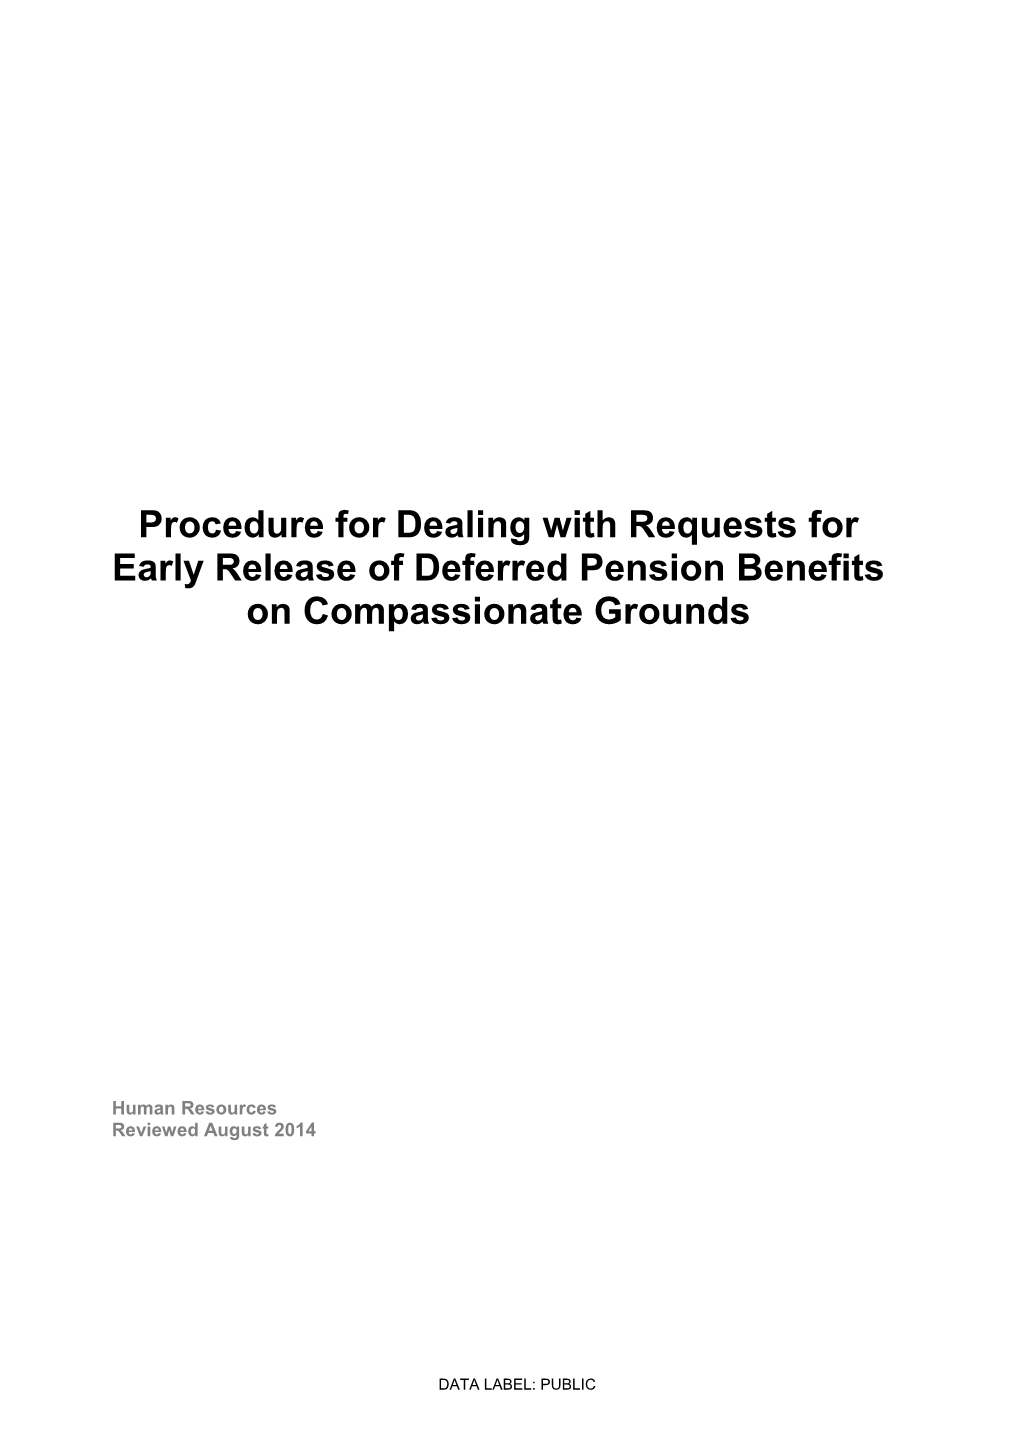 Procedure for Dealing with Requests for Early Release of Deferred Pension Benefits